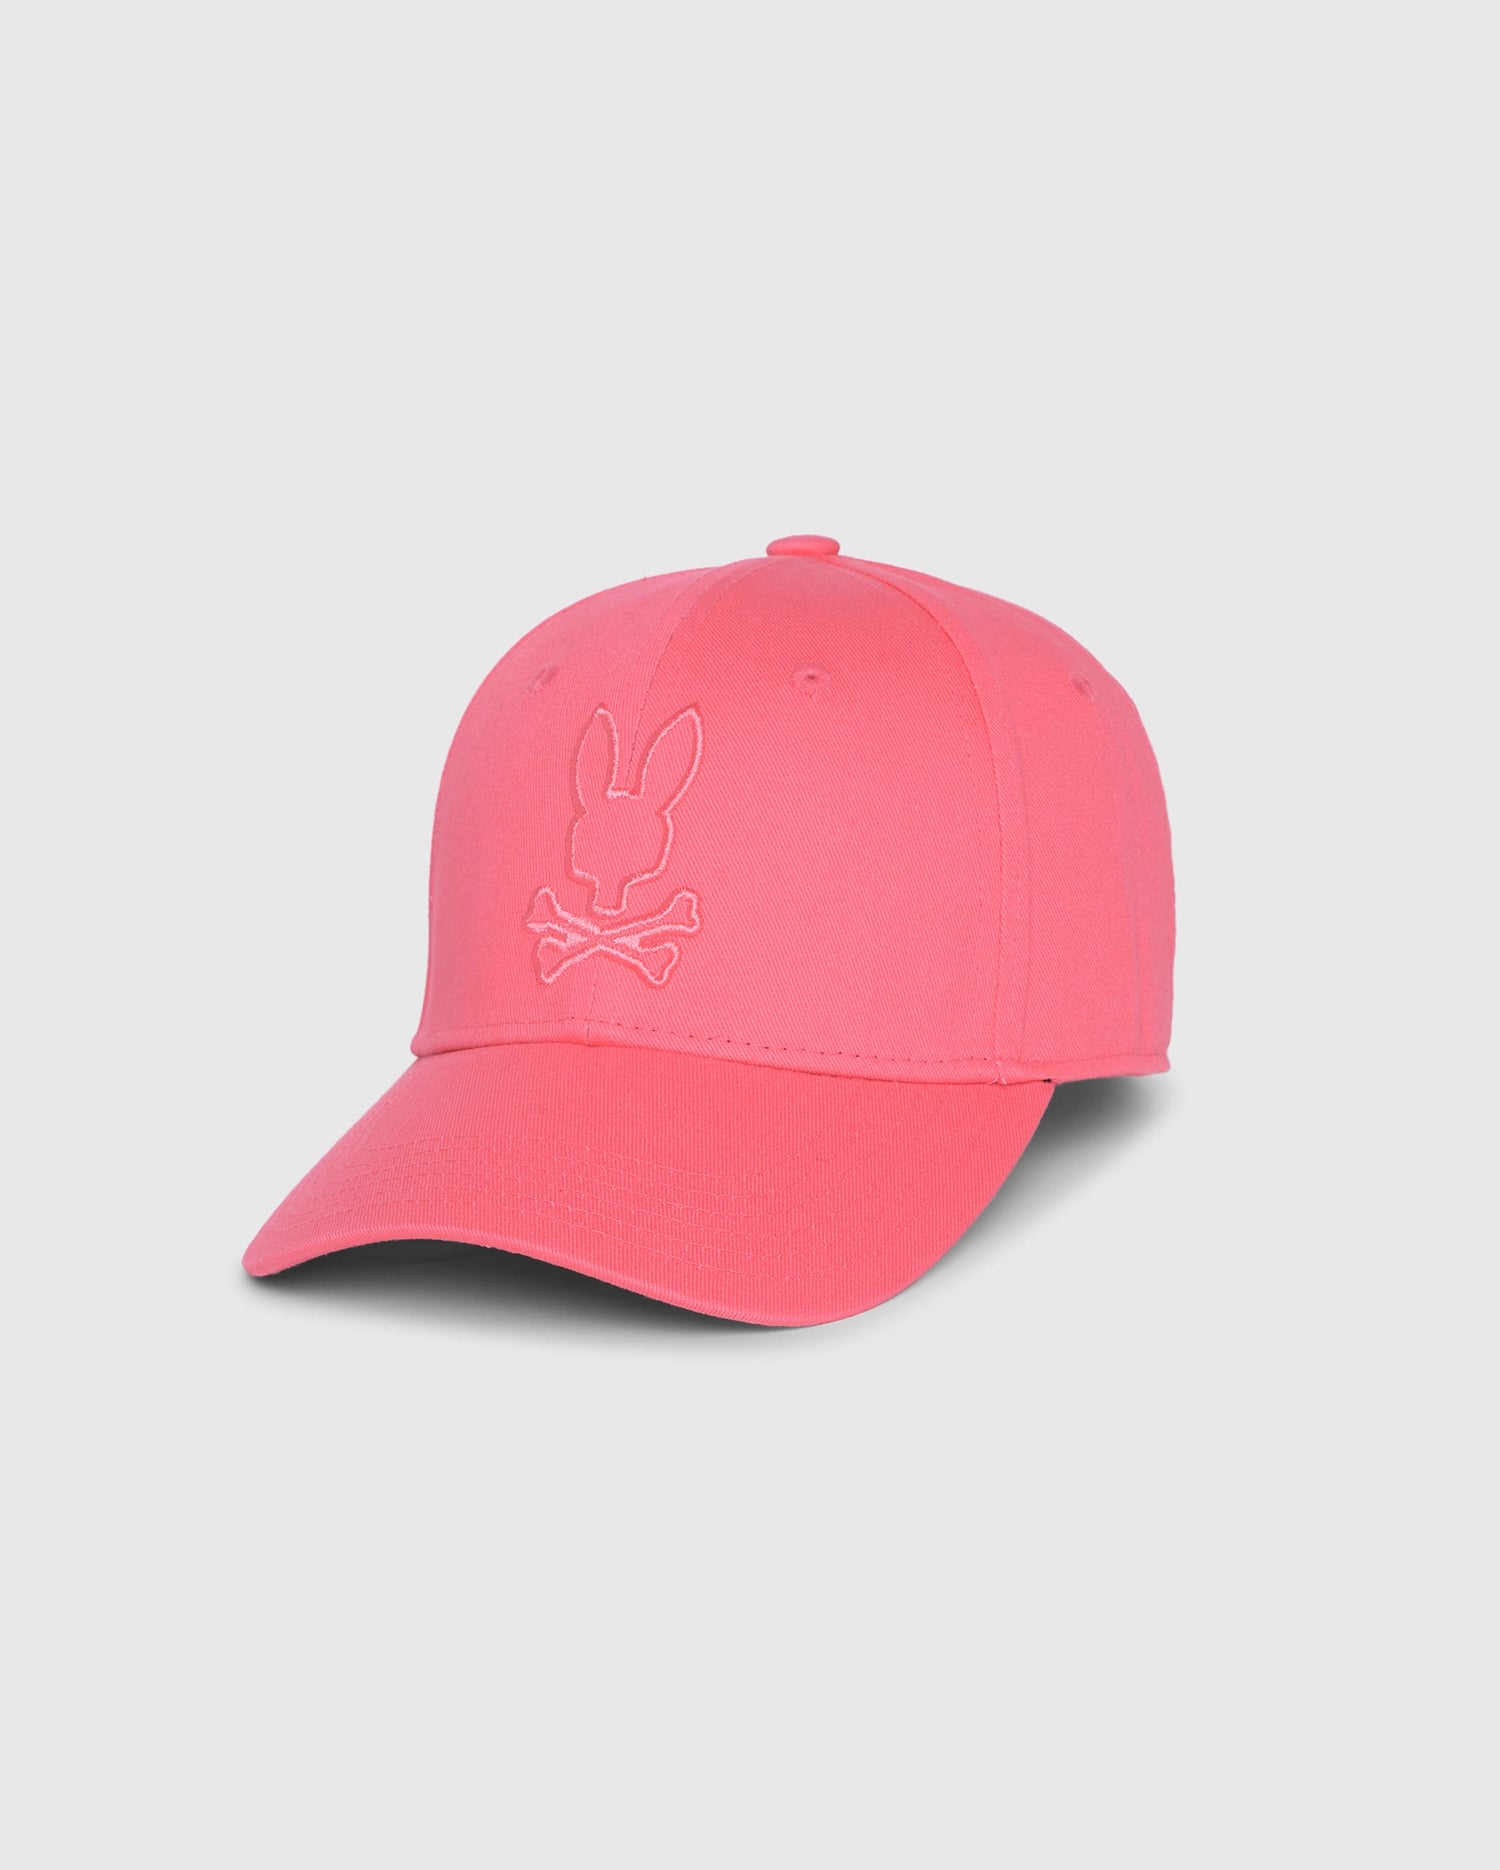 Funny cap pink strap - clothing & accessories - by owner - apparel